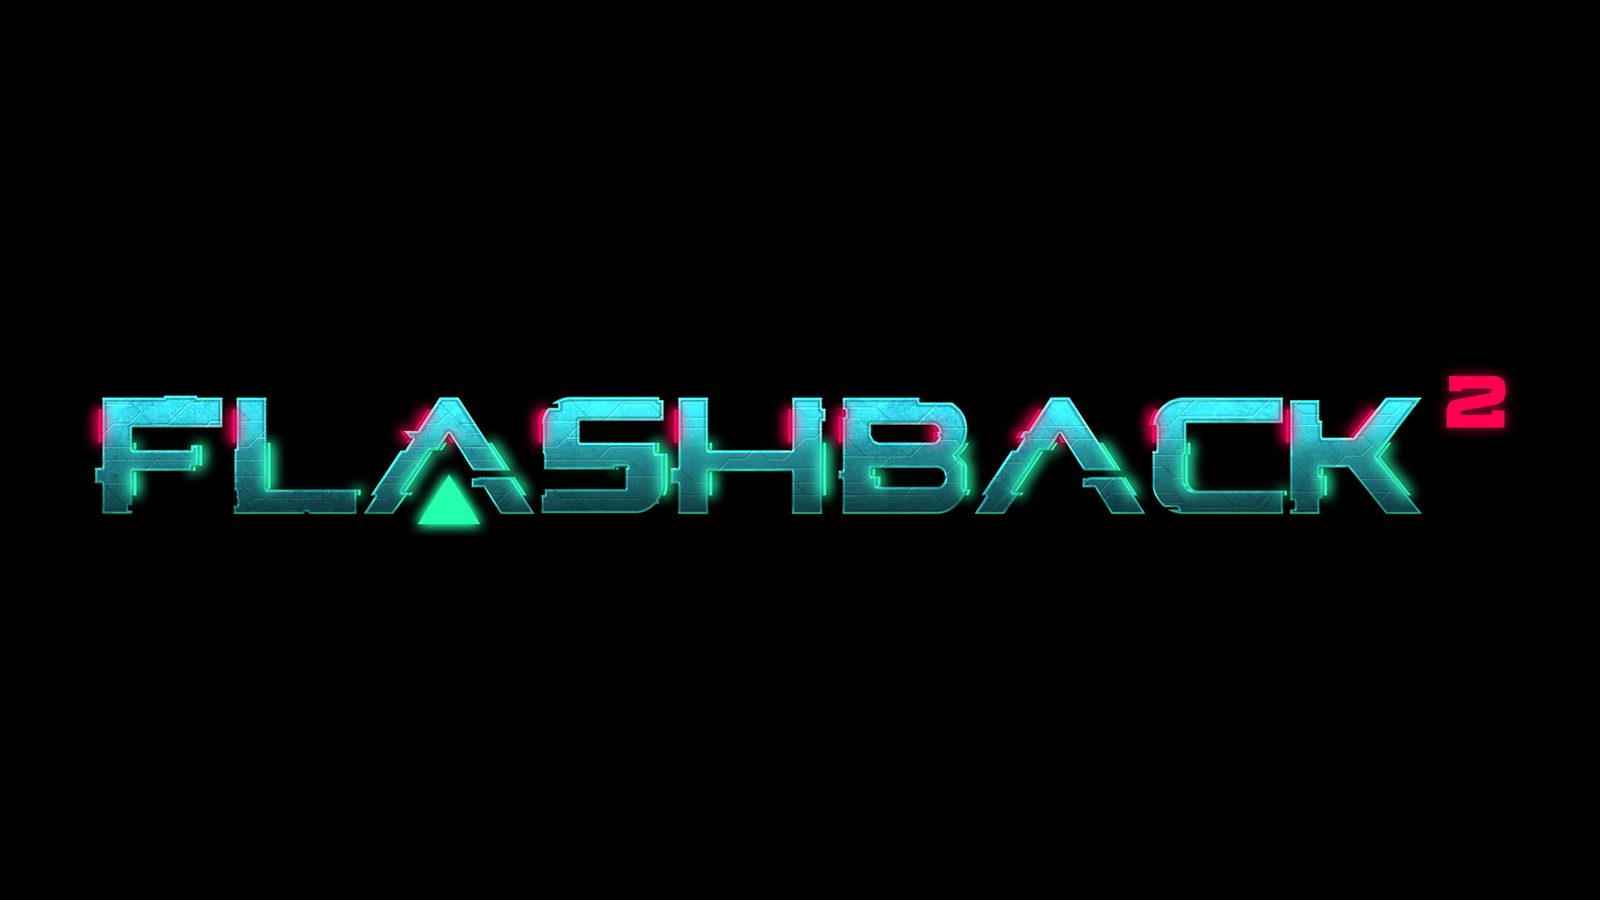 Sci-fi platformer sequel Flashback 2 is coming to PC this winter